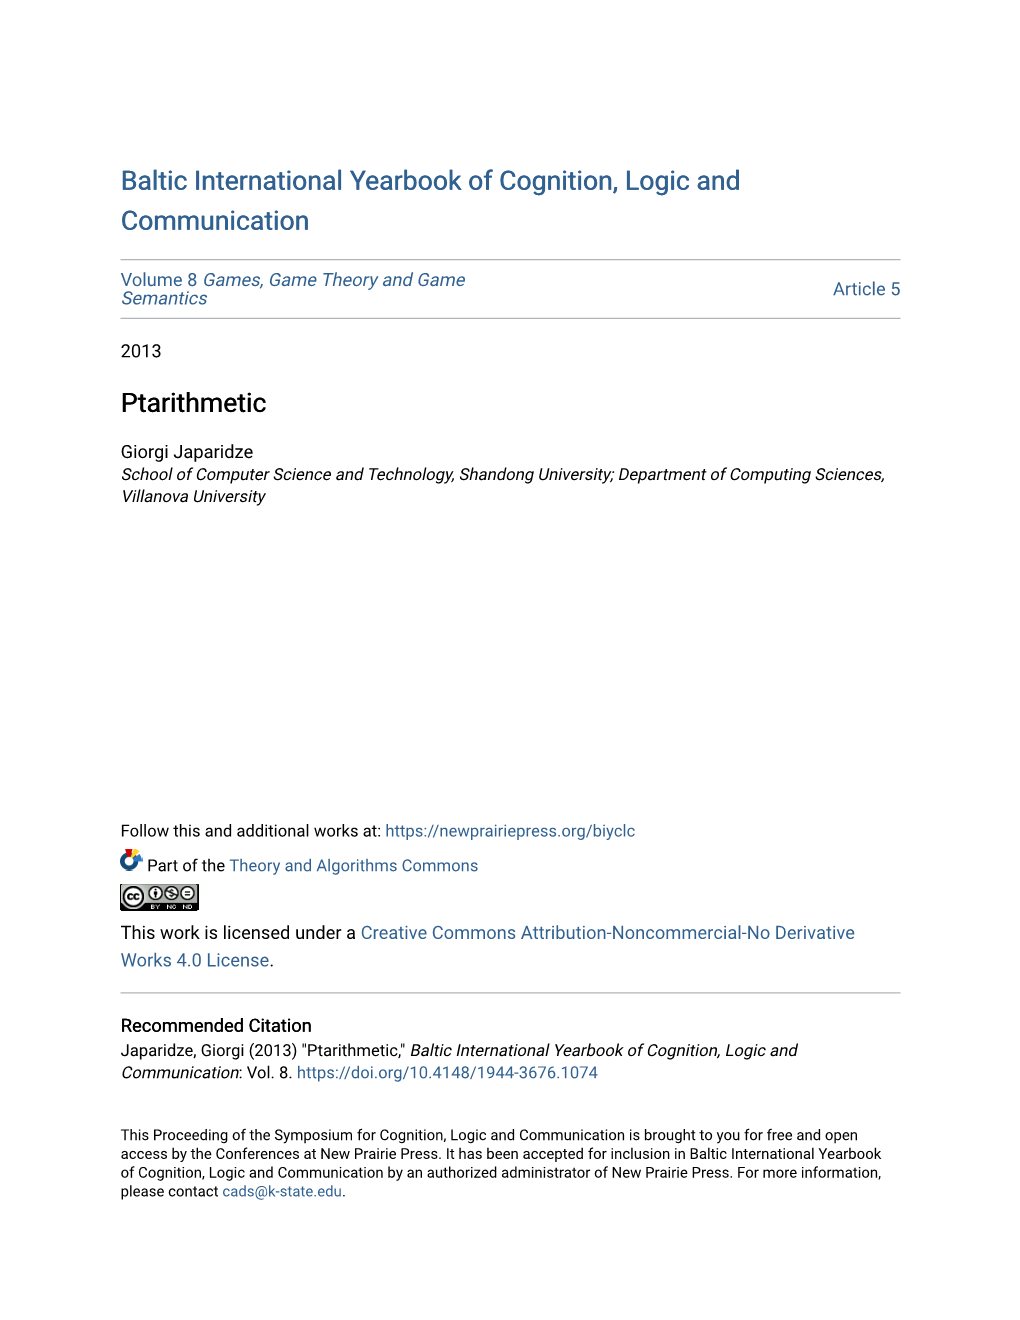 Baltic International Yearbook of Cognition, Logic and Communication